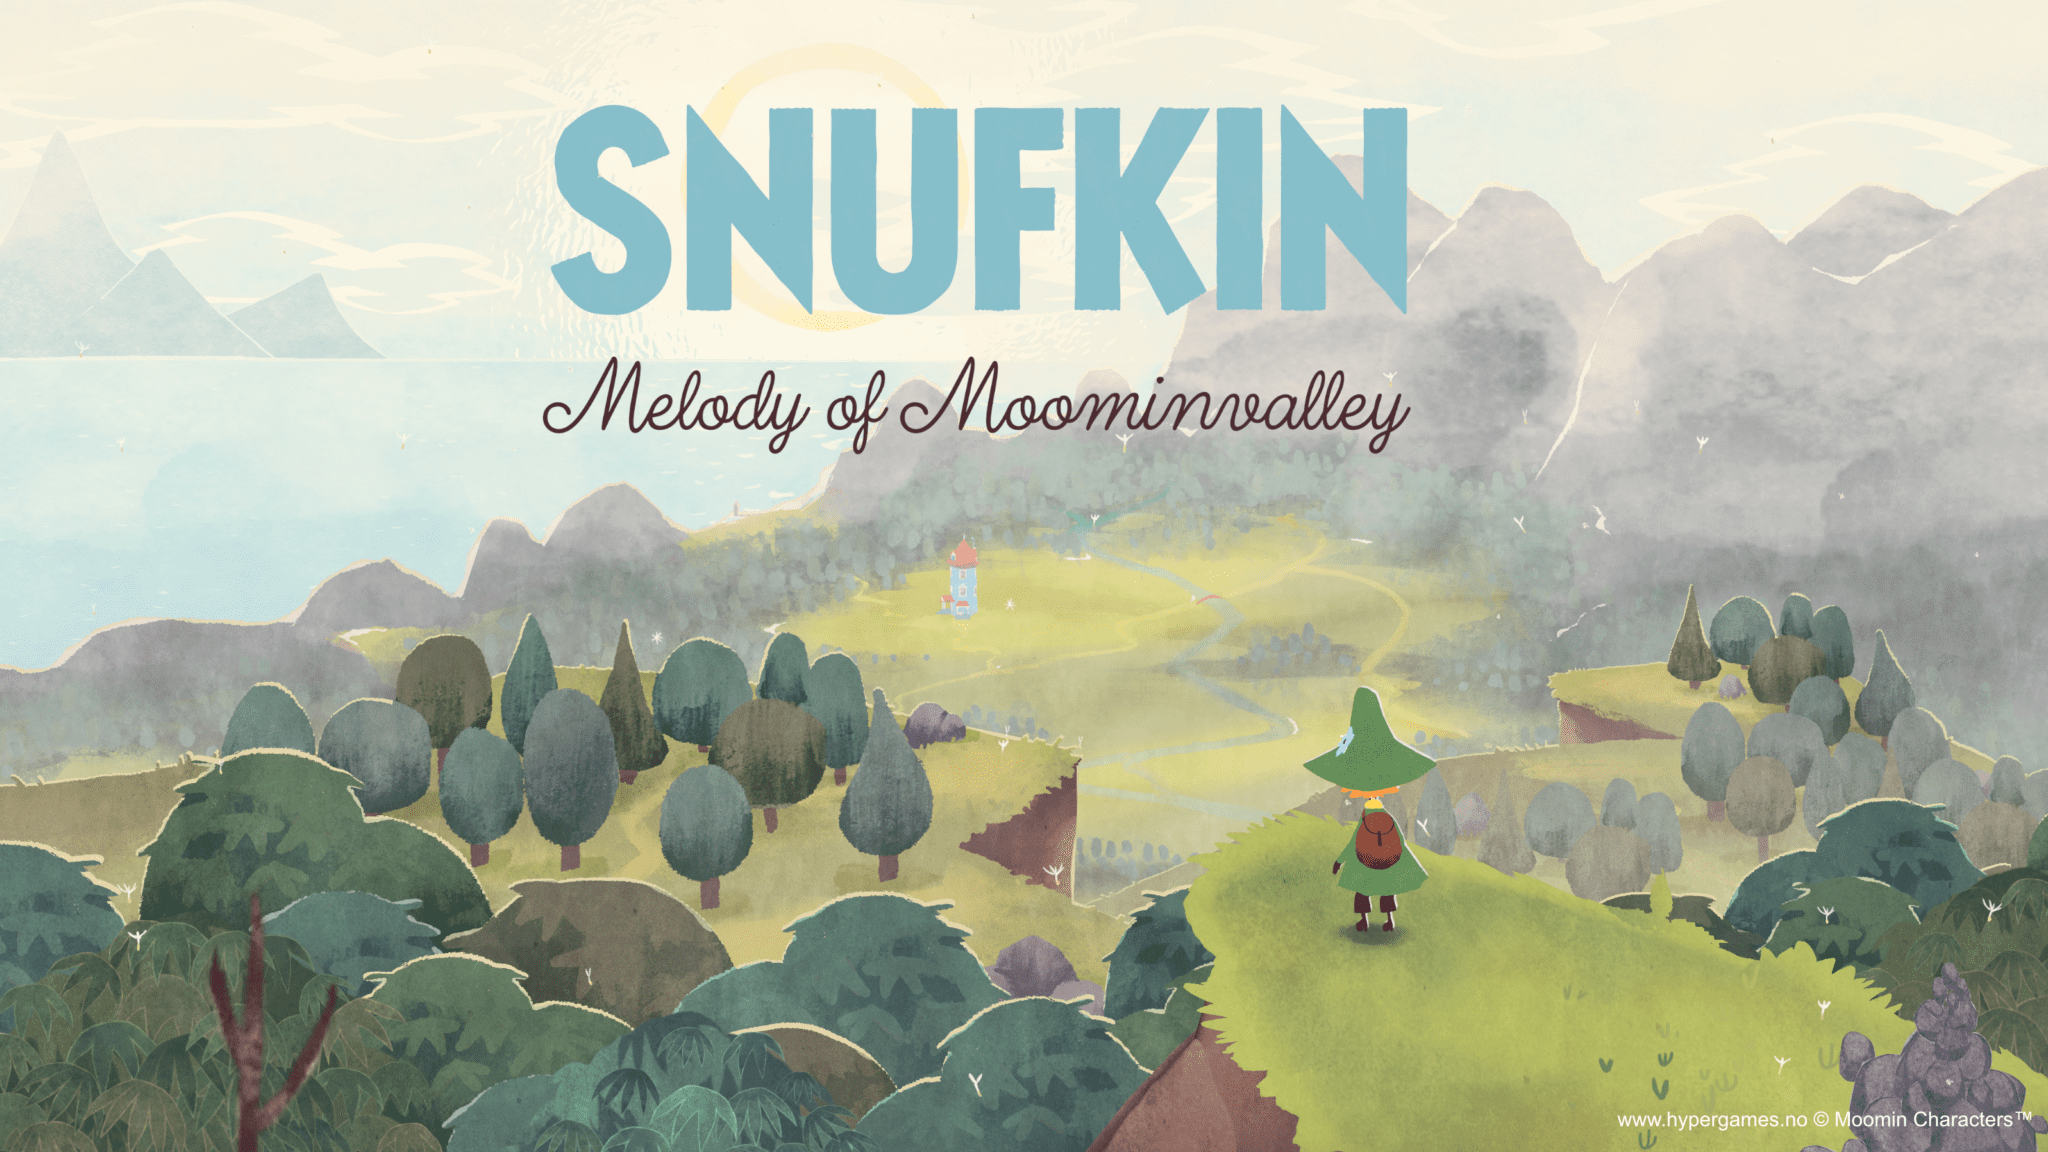 Snufkin: Melody Of Moominvalley art showing Snufkin and the valley